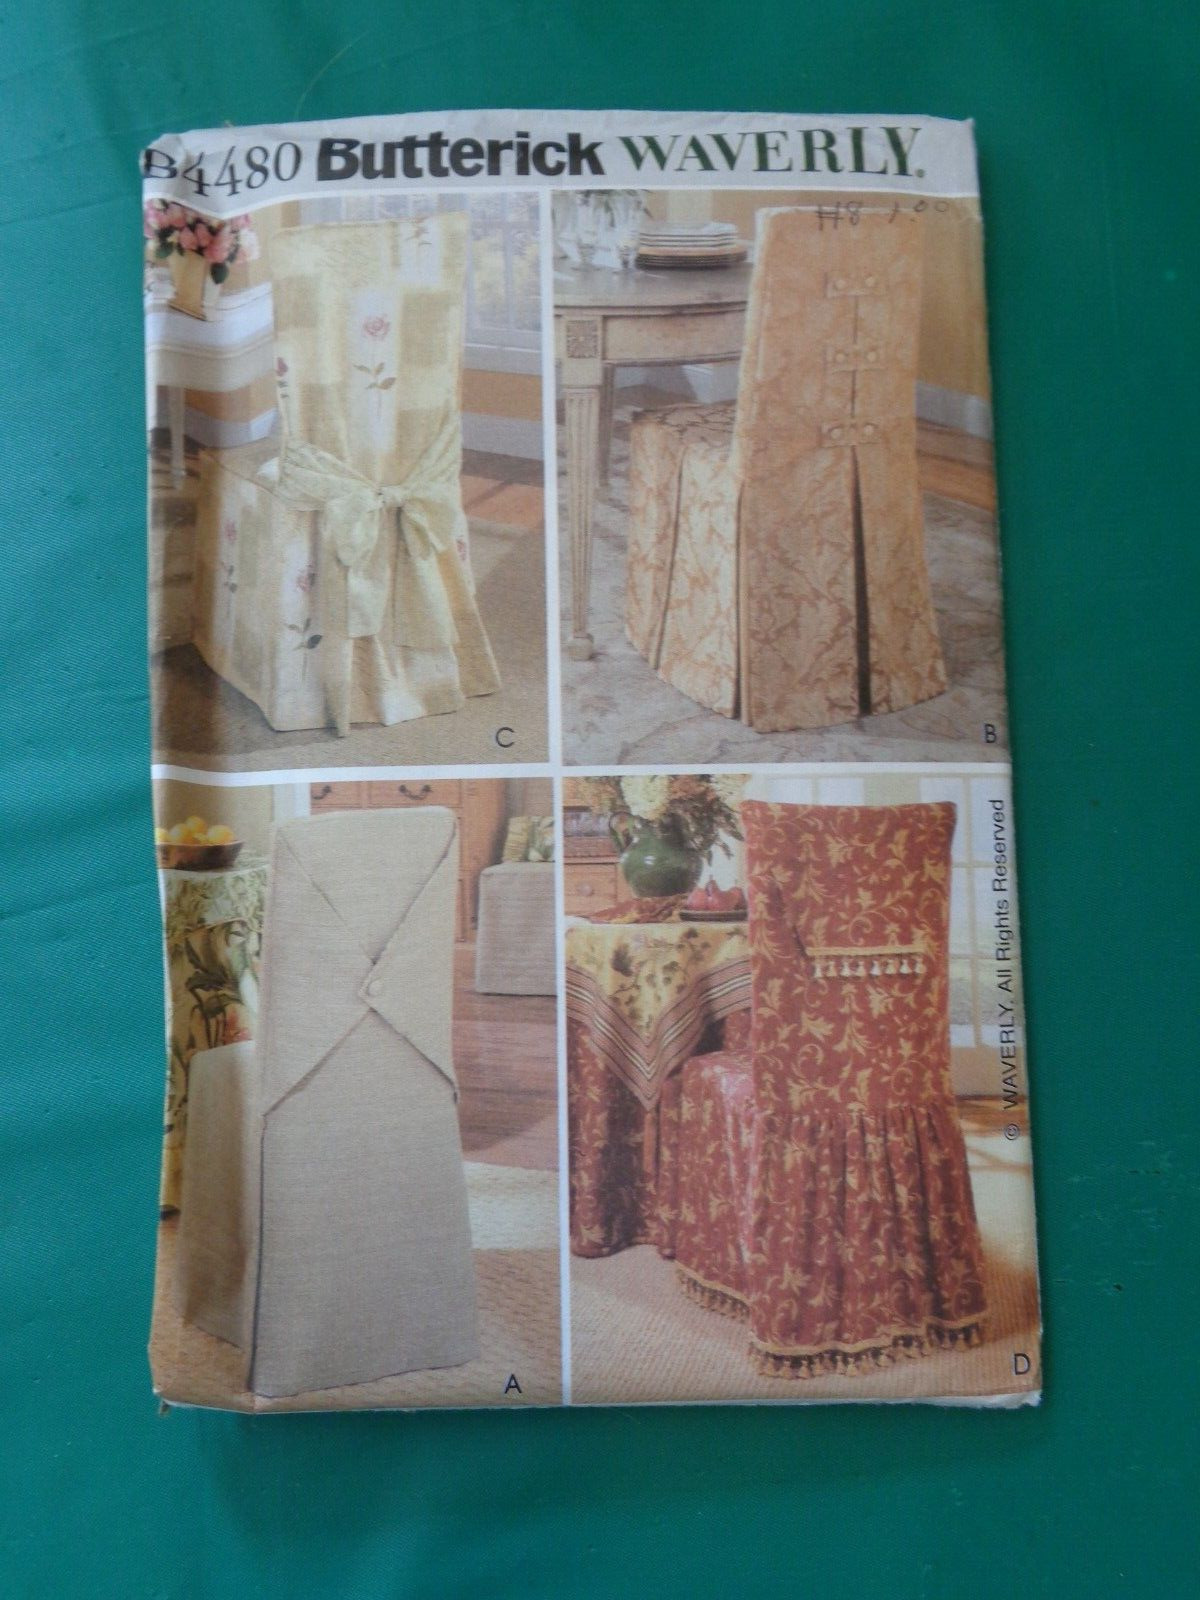 2005 Butterick Waverly Sewing Pattern B4480 Home Decor Chair Covers Uncut